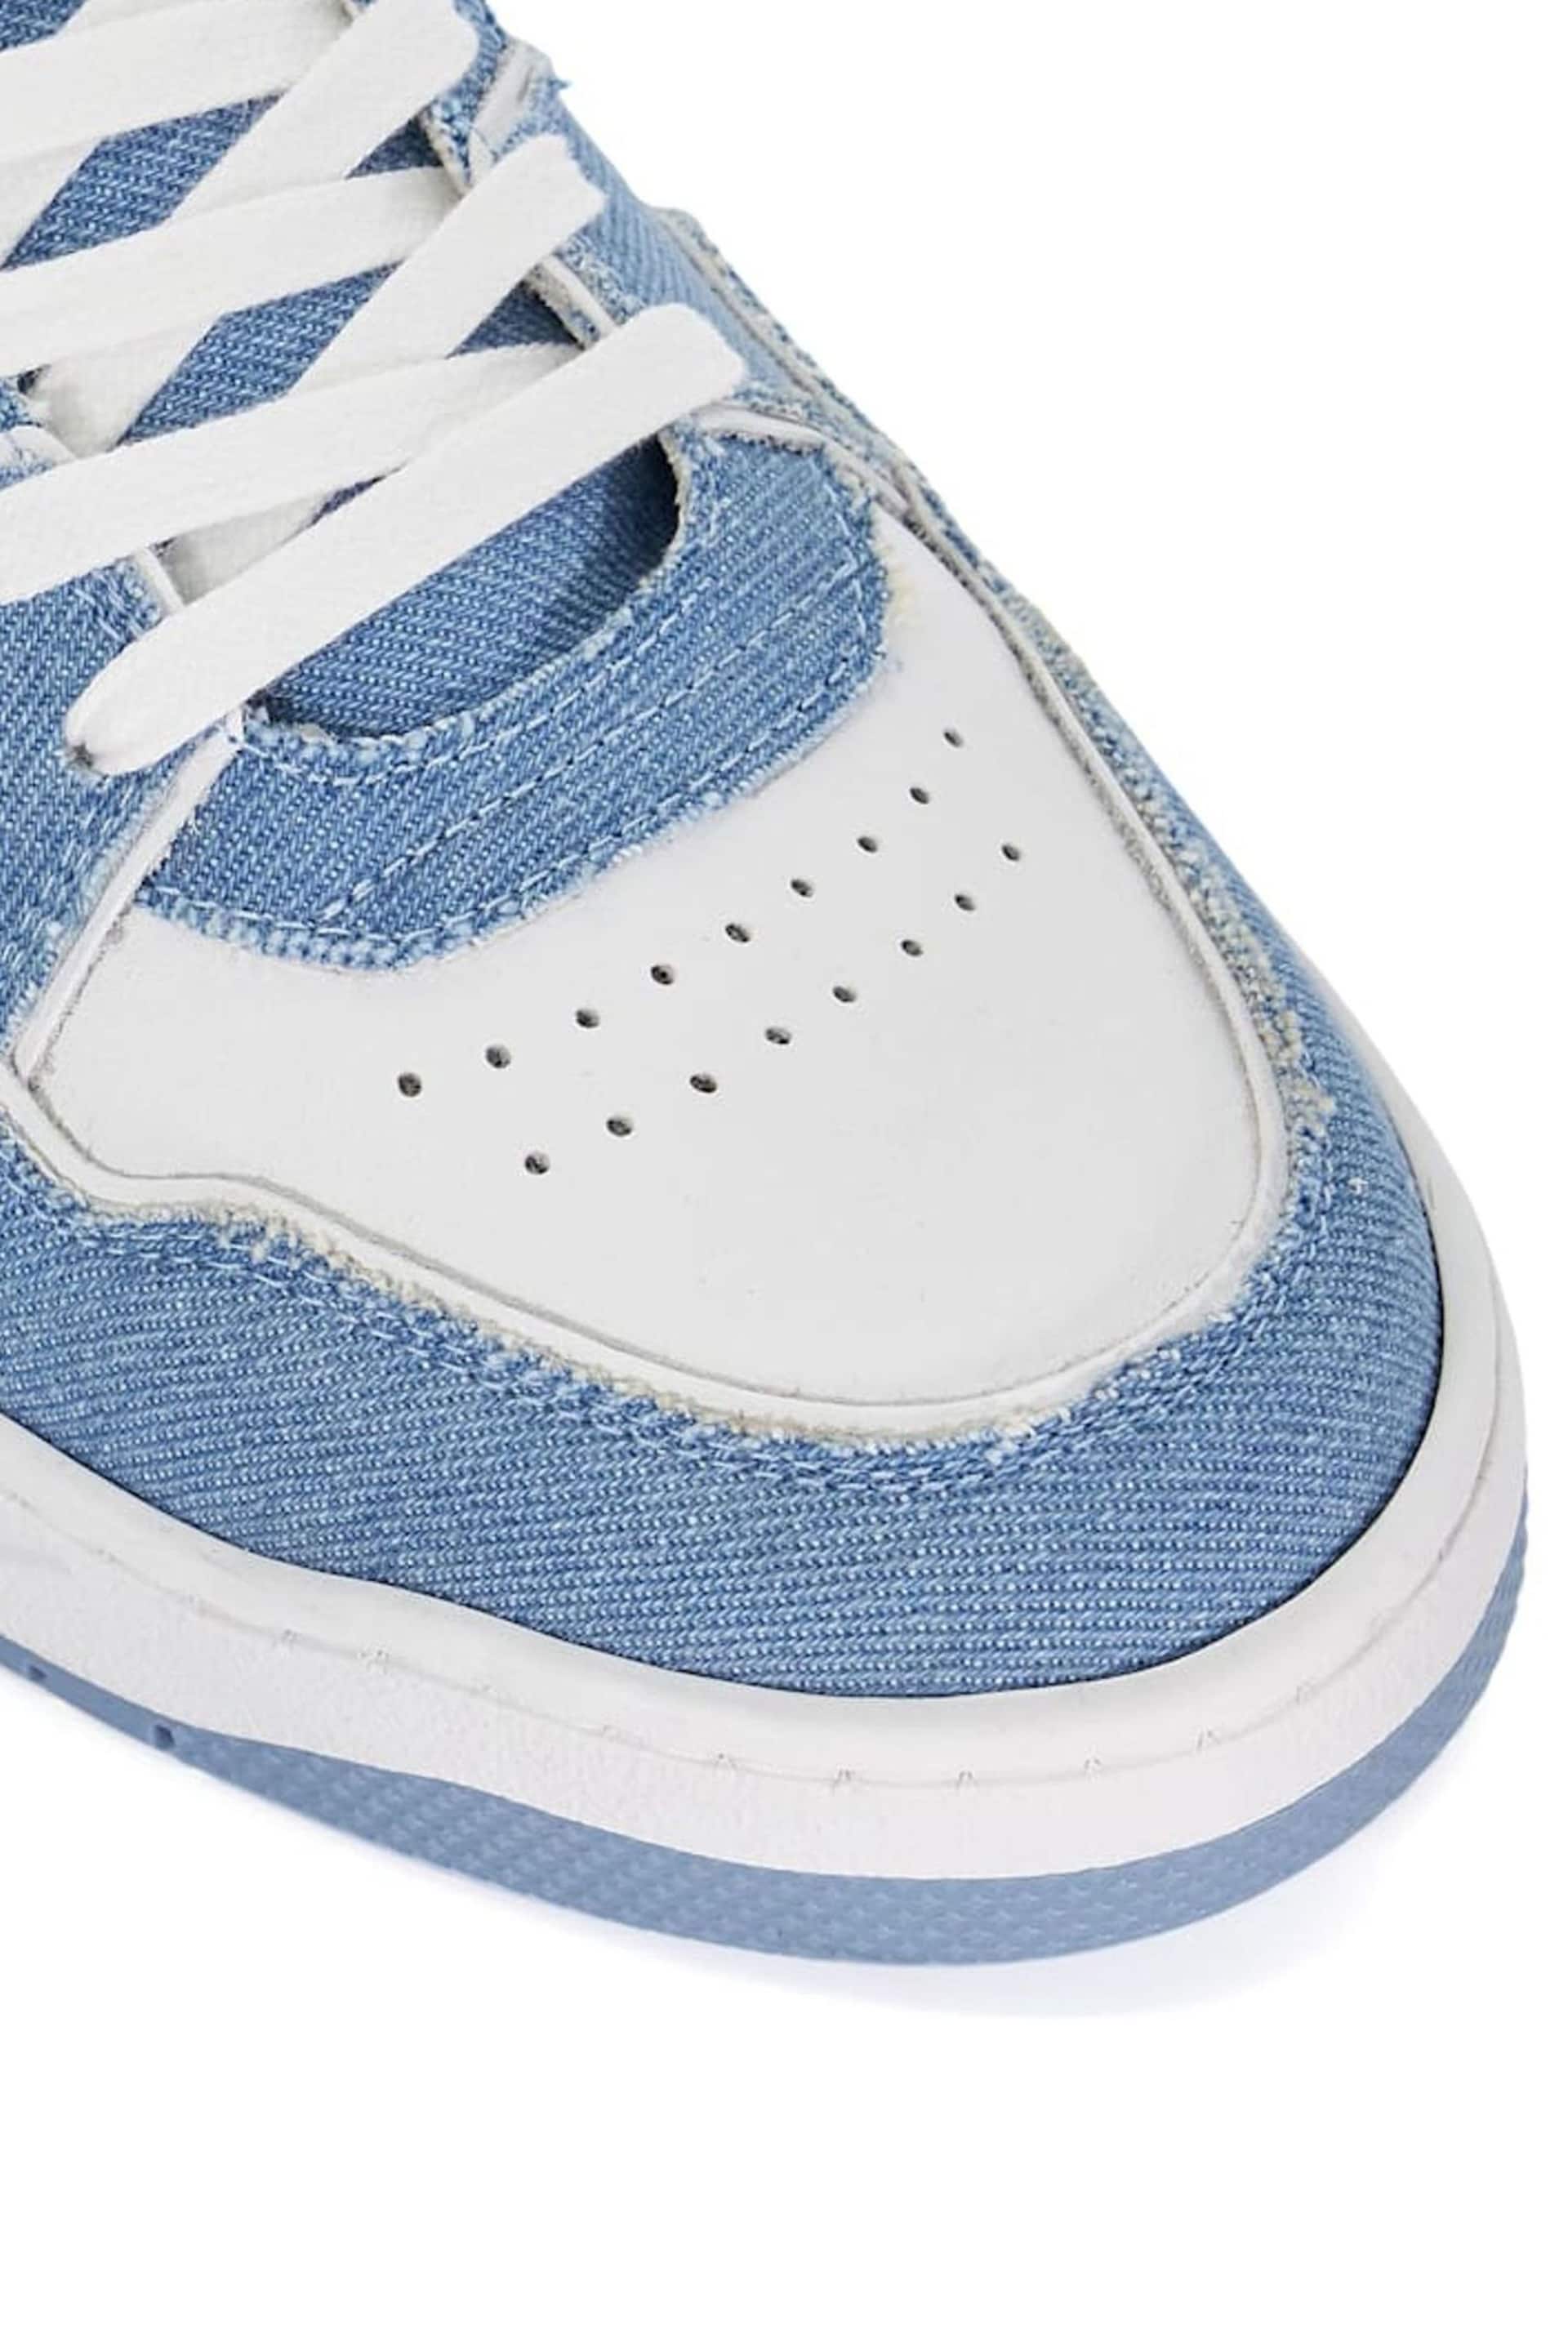 Dune London Blue Tainted Chunky Court Trainers - Image 5 of 6